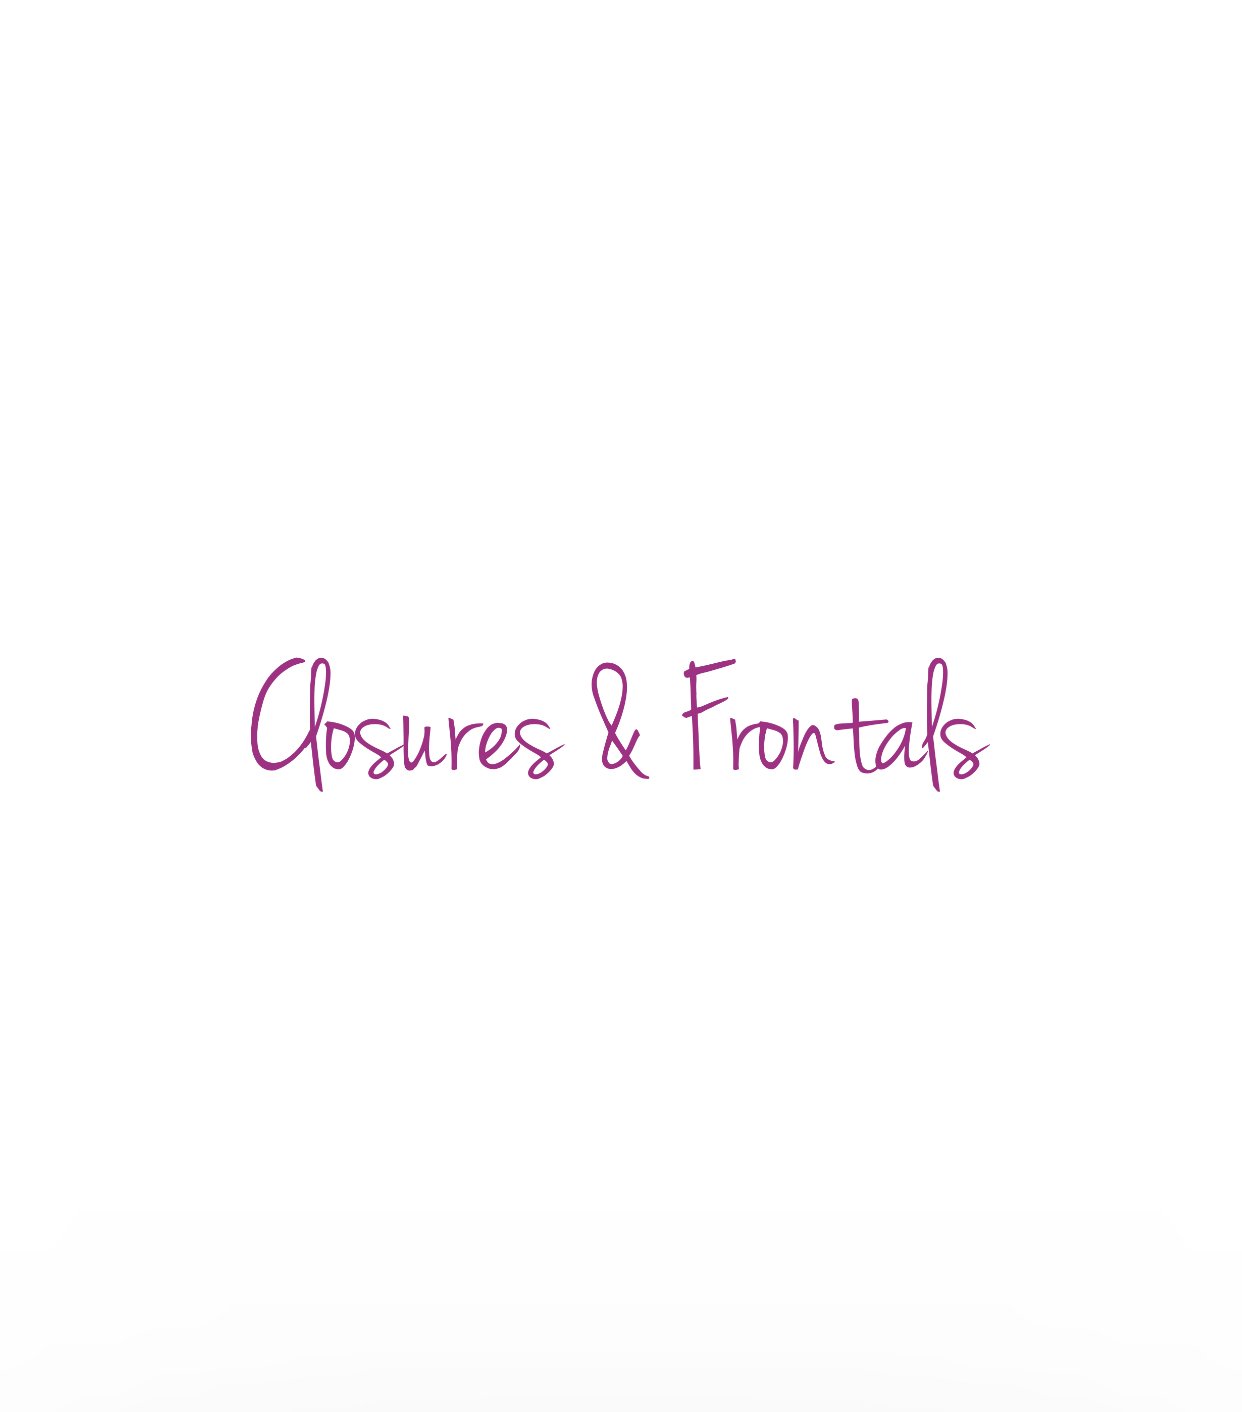 Image of Closures and frontals